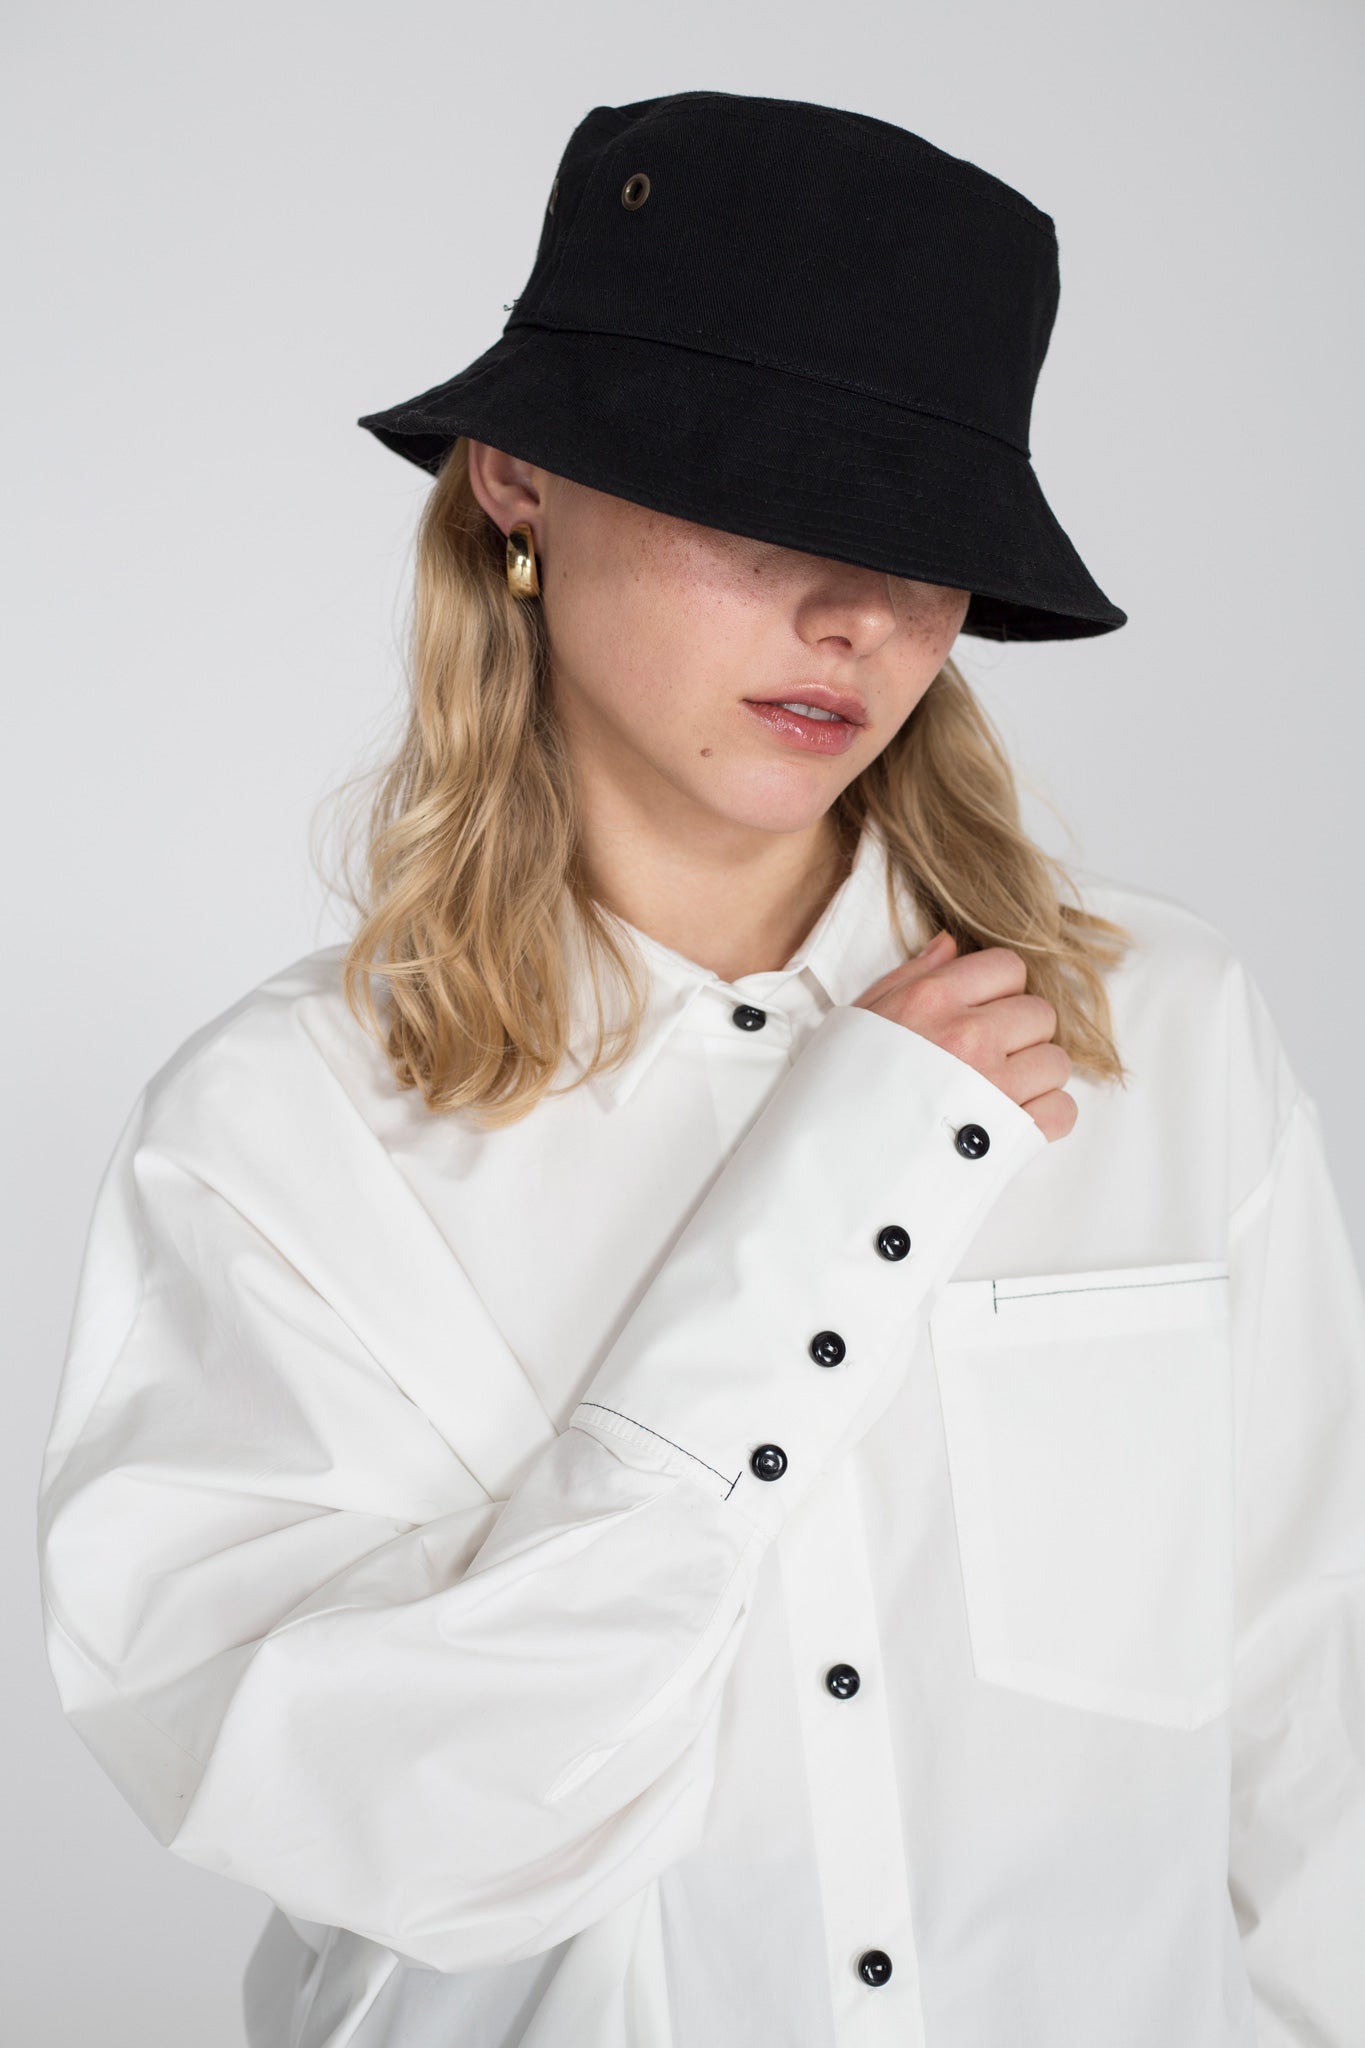 Oversized white shirt with one wide sleeve